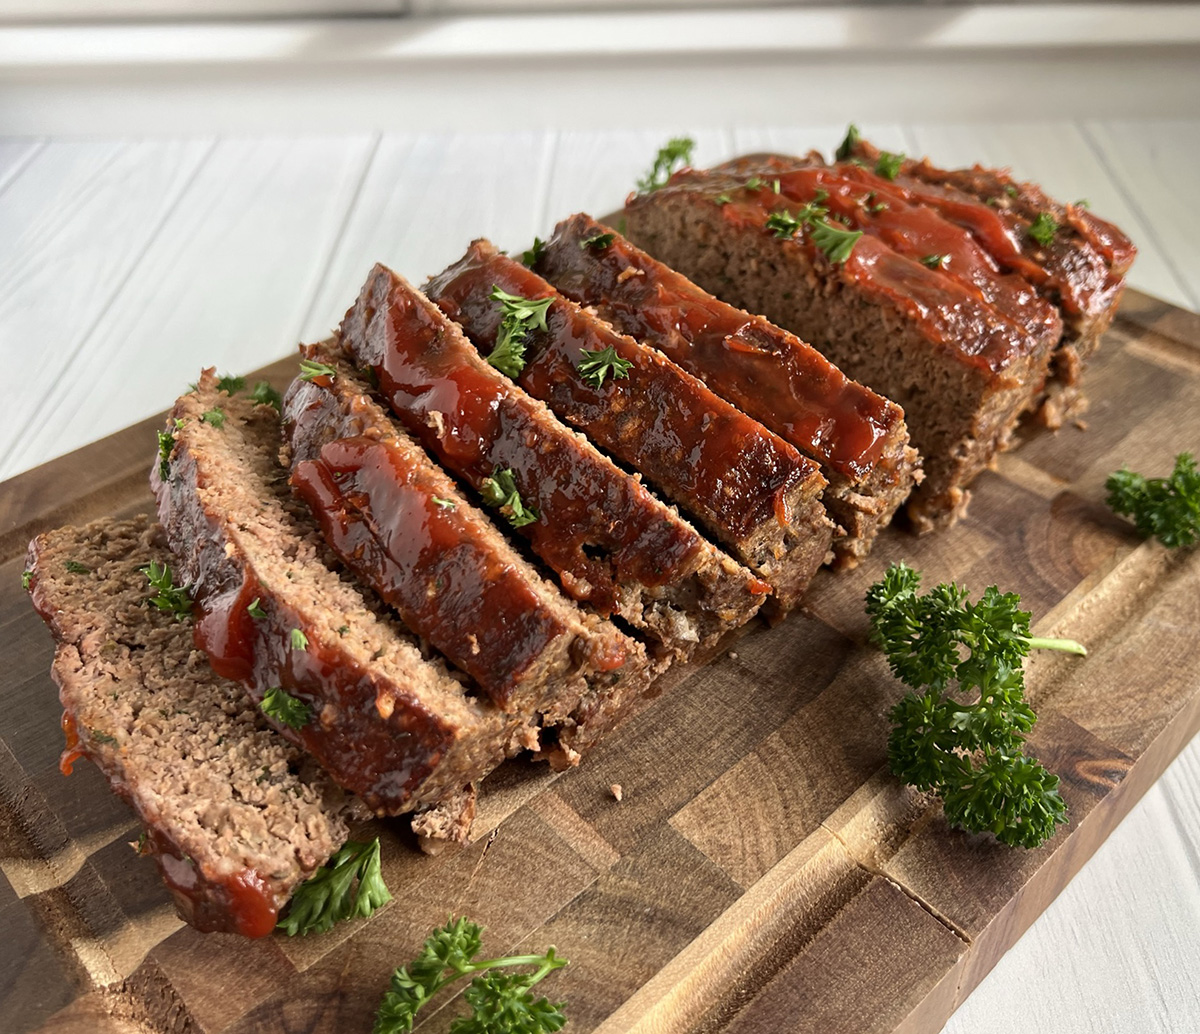 Homemade low sodium meatloaf